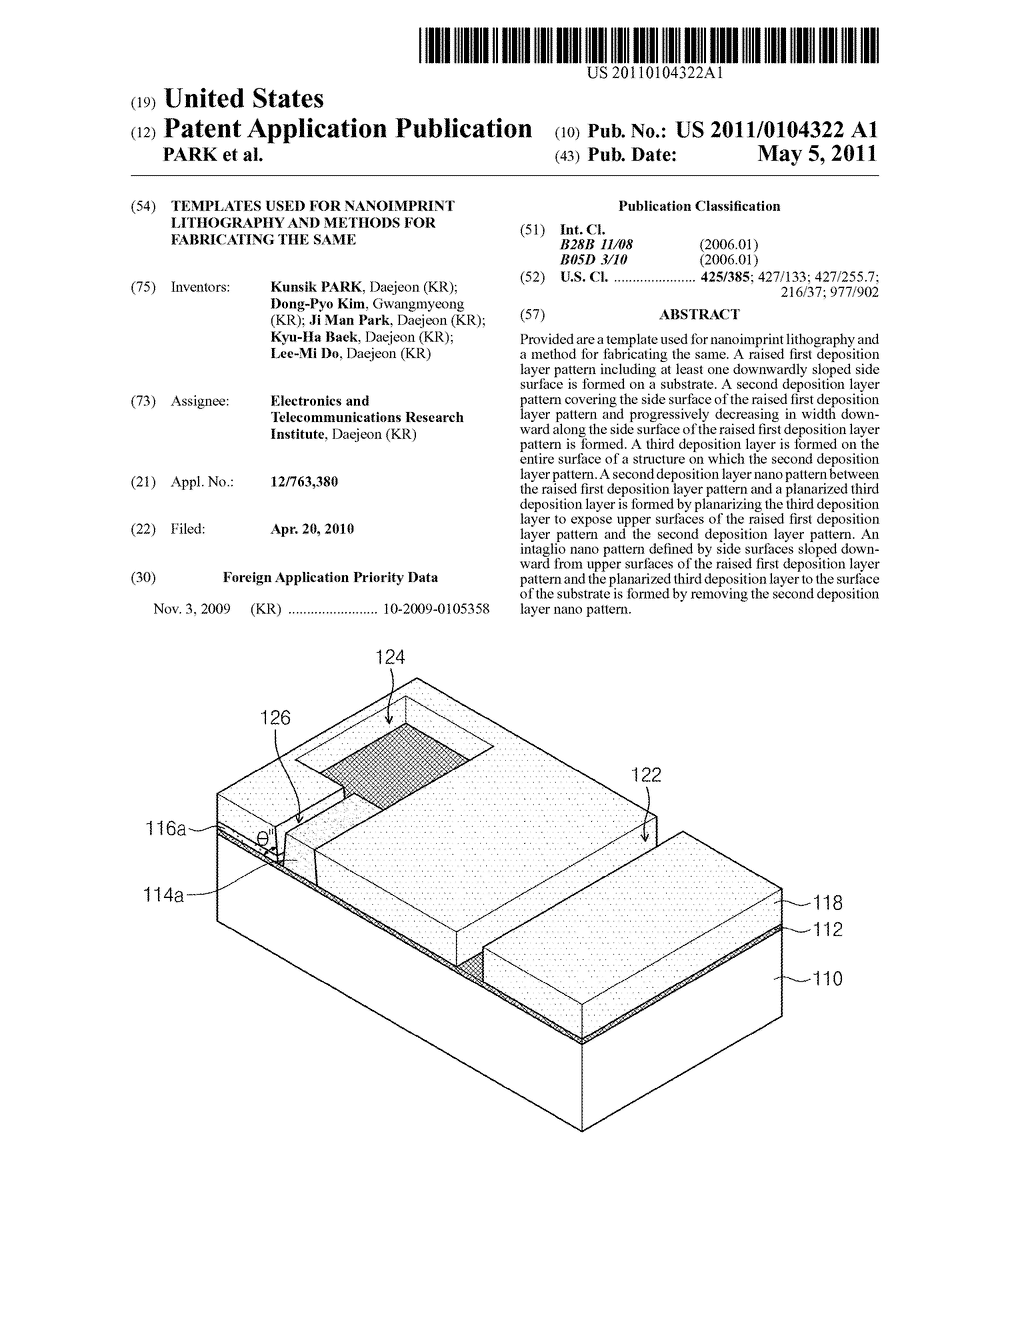 TEMPLATES USED FOR NANOIMPRINT LITHOGRAPHY AND METHODS FOR FABRICATING THE SAME - diagram, schematic, and image 01